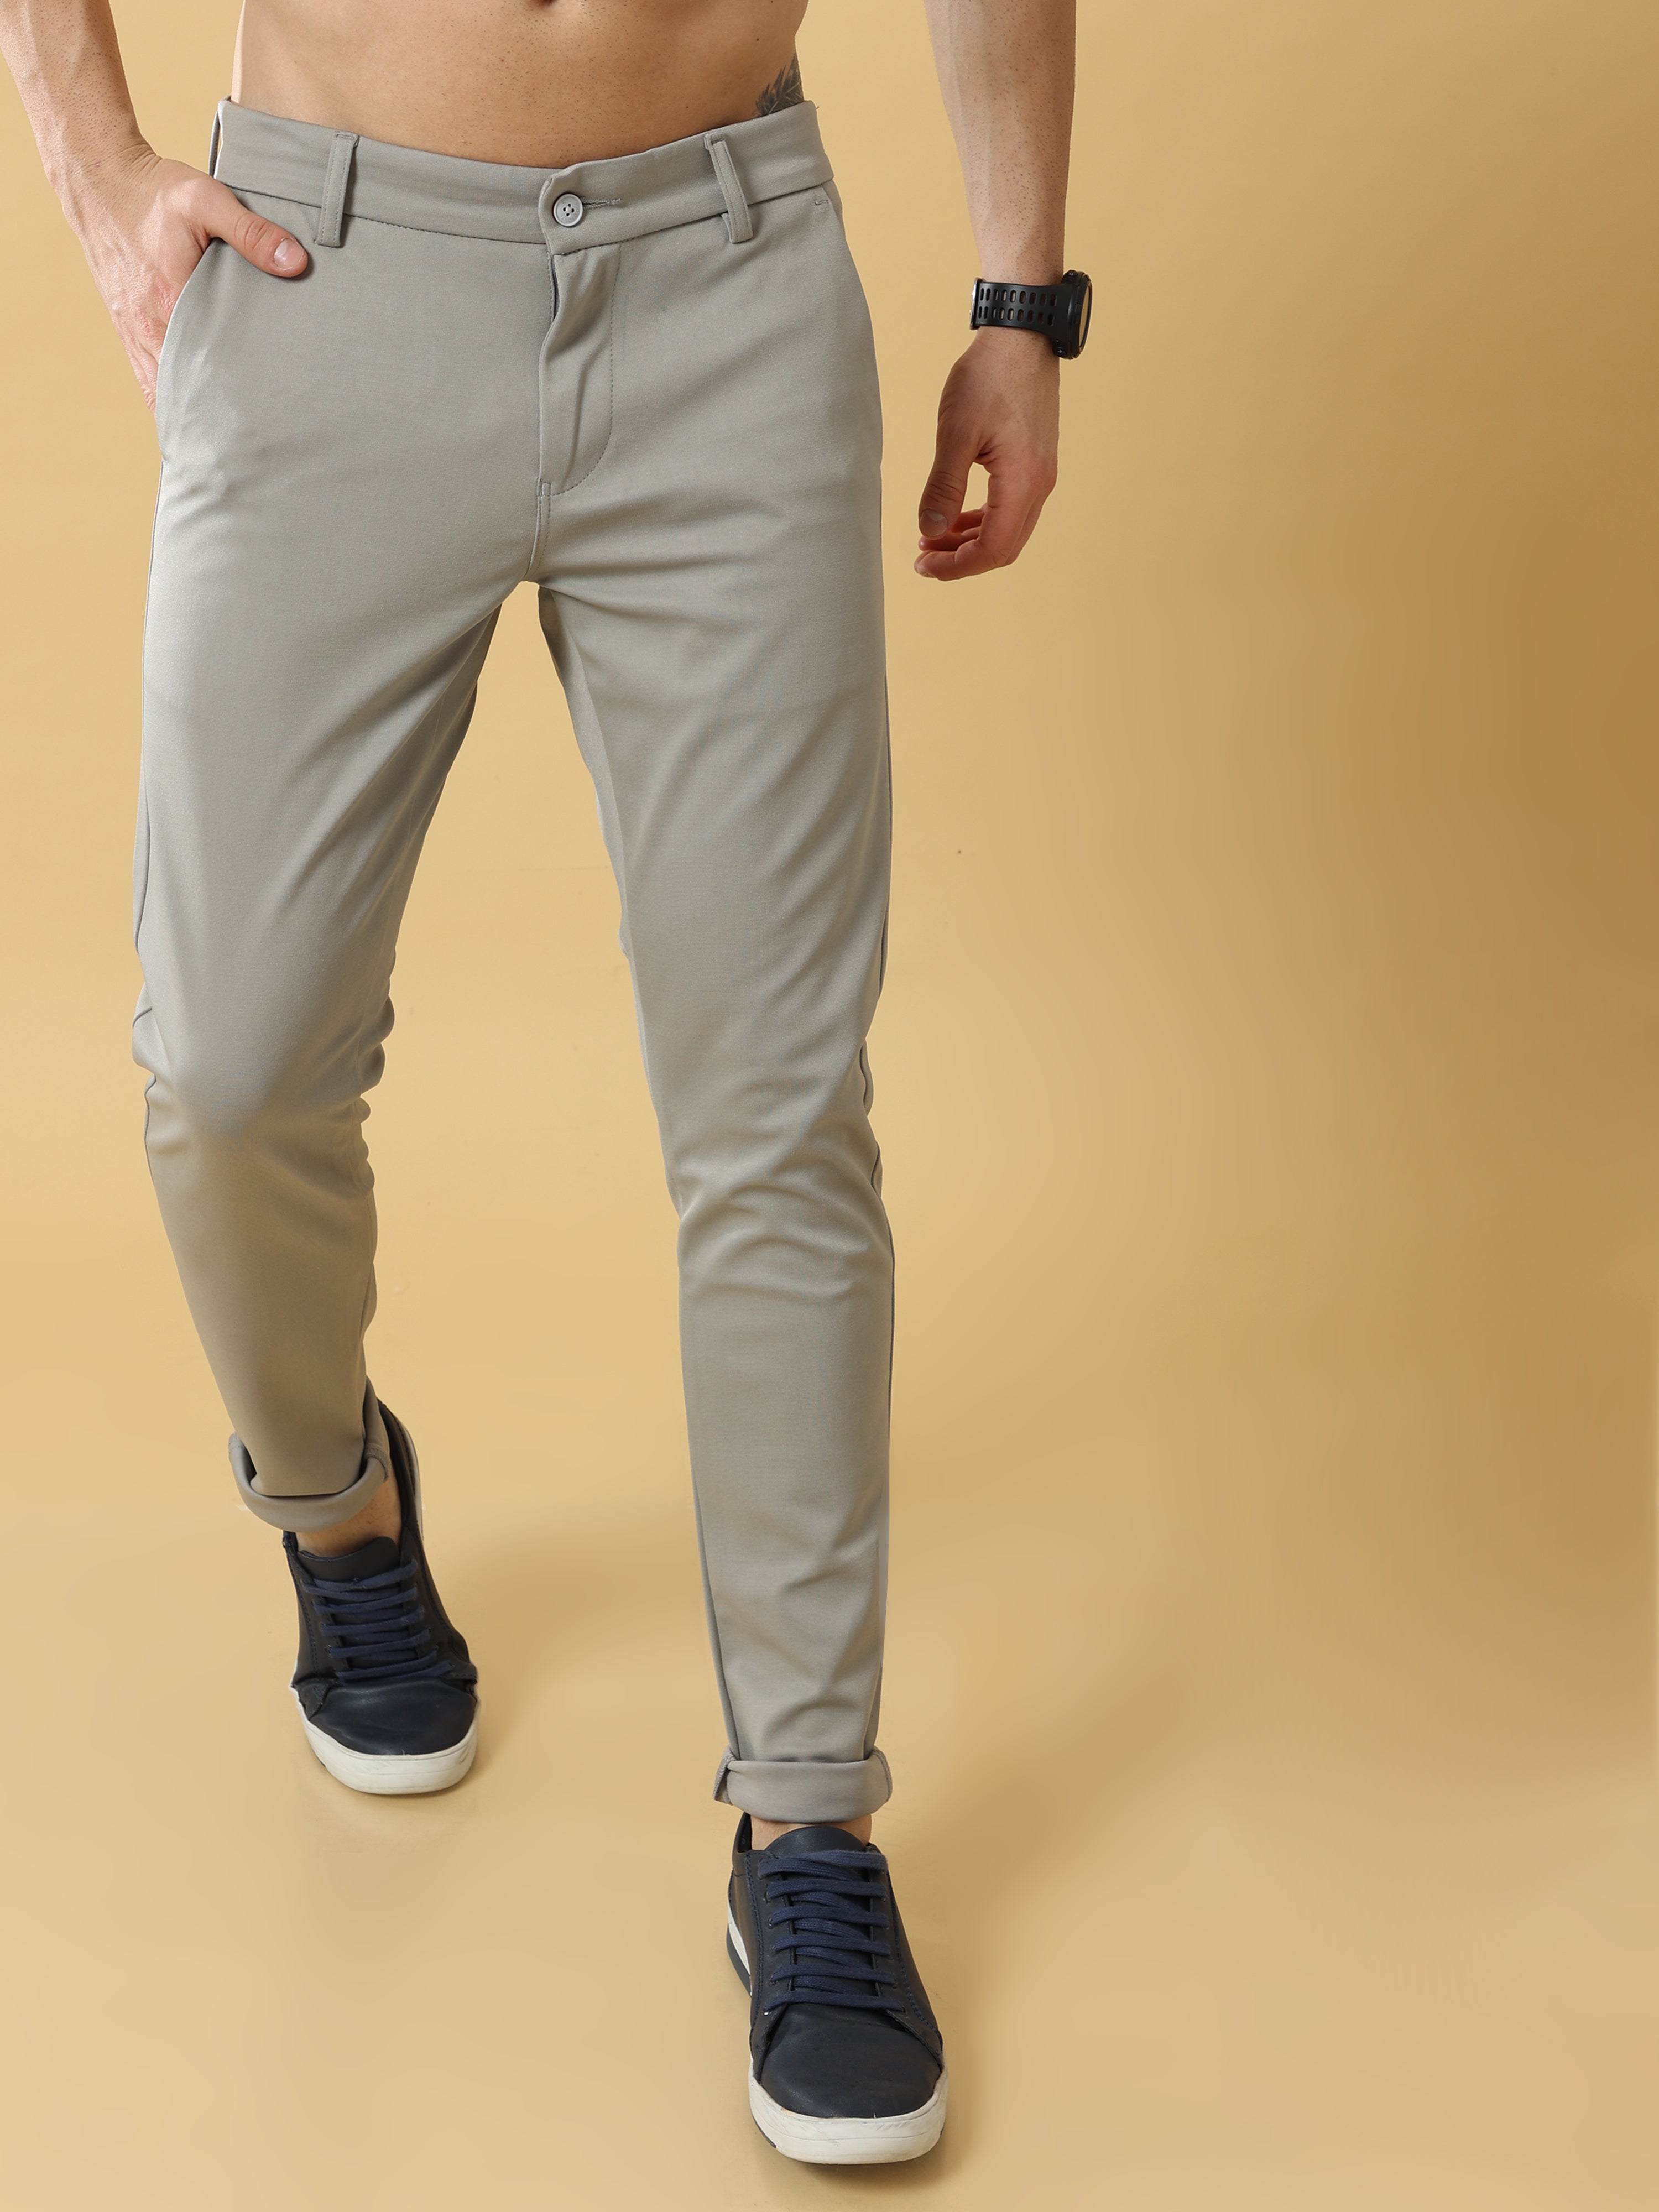 Stylish and Stretchable Lycra Trousers for Men